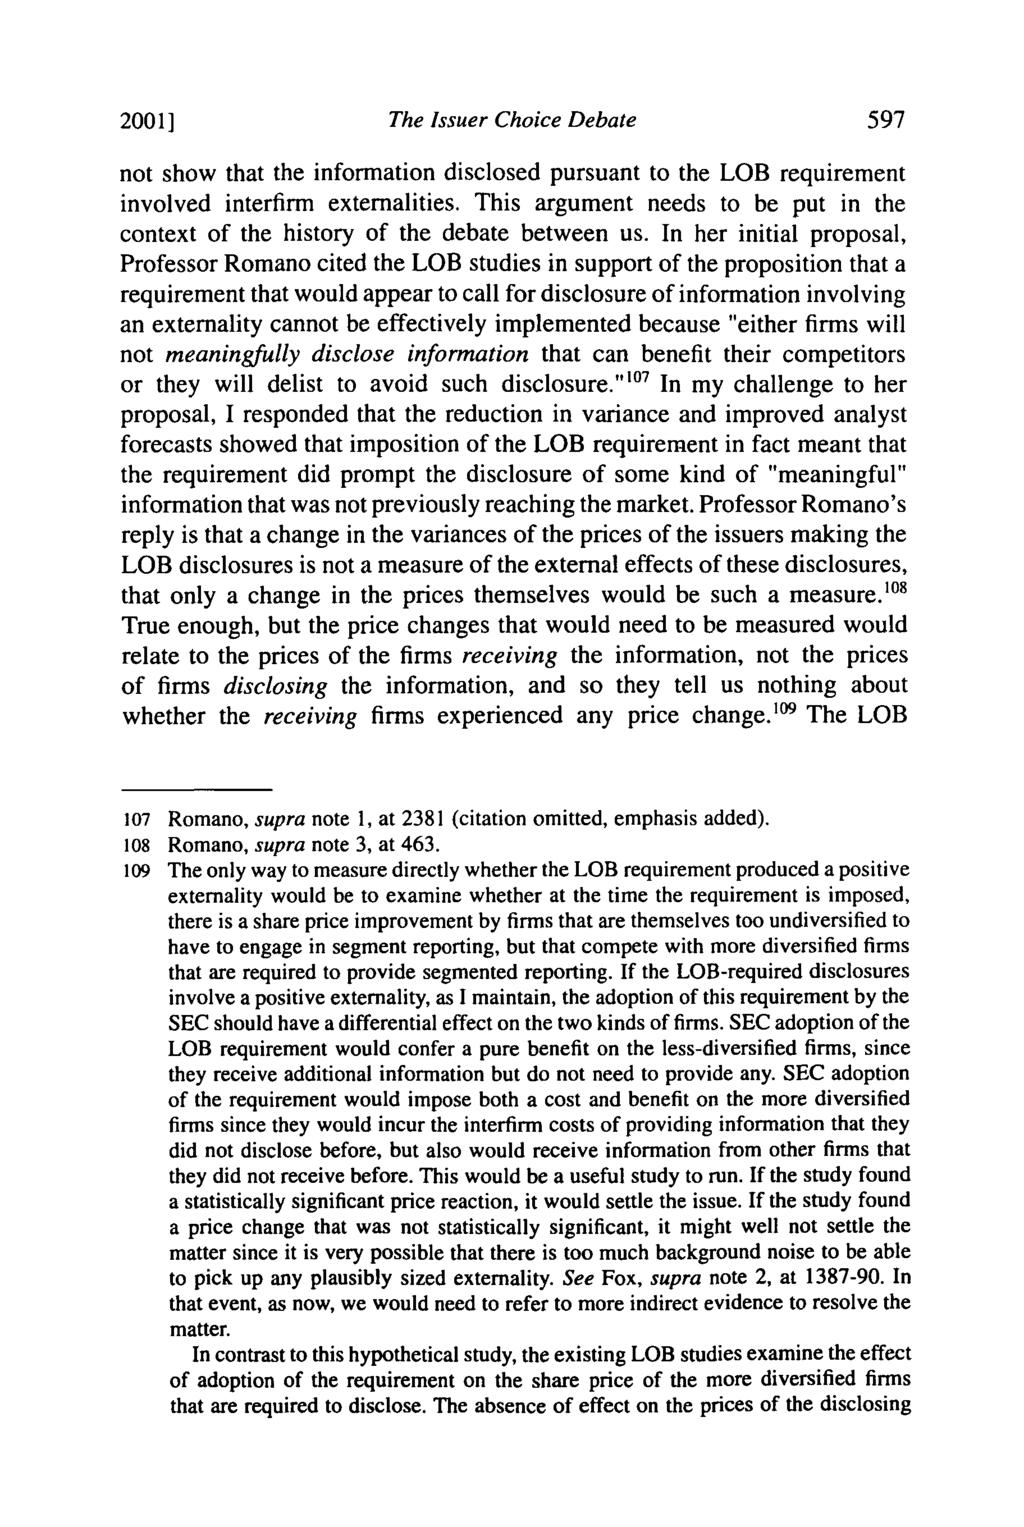 2001] The Issuer Choice Debate not show that the information disclosed pursuant to the LOB requirement involved interfirm externalities.